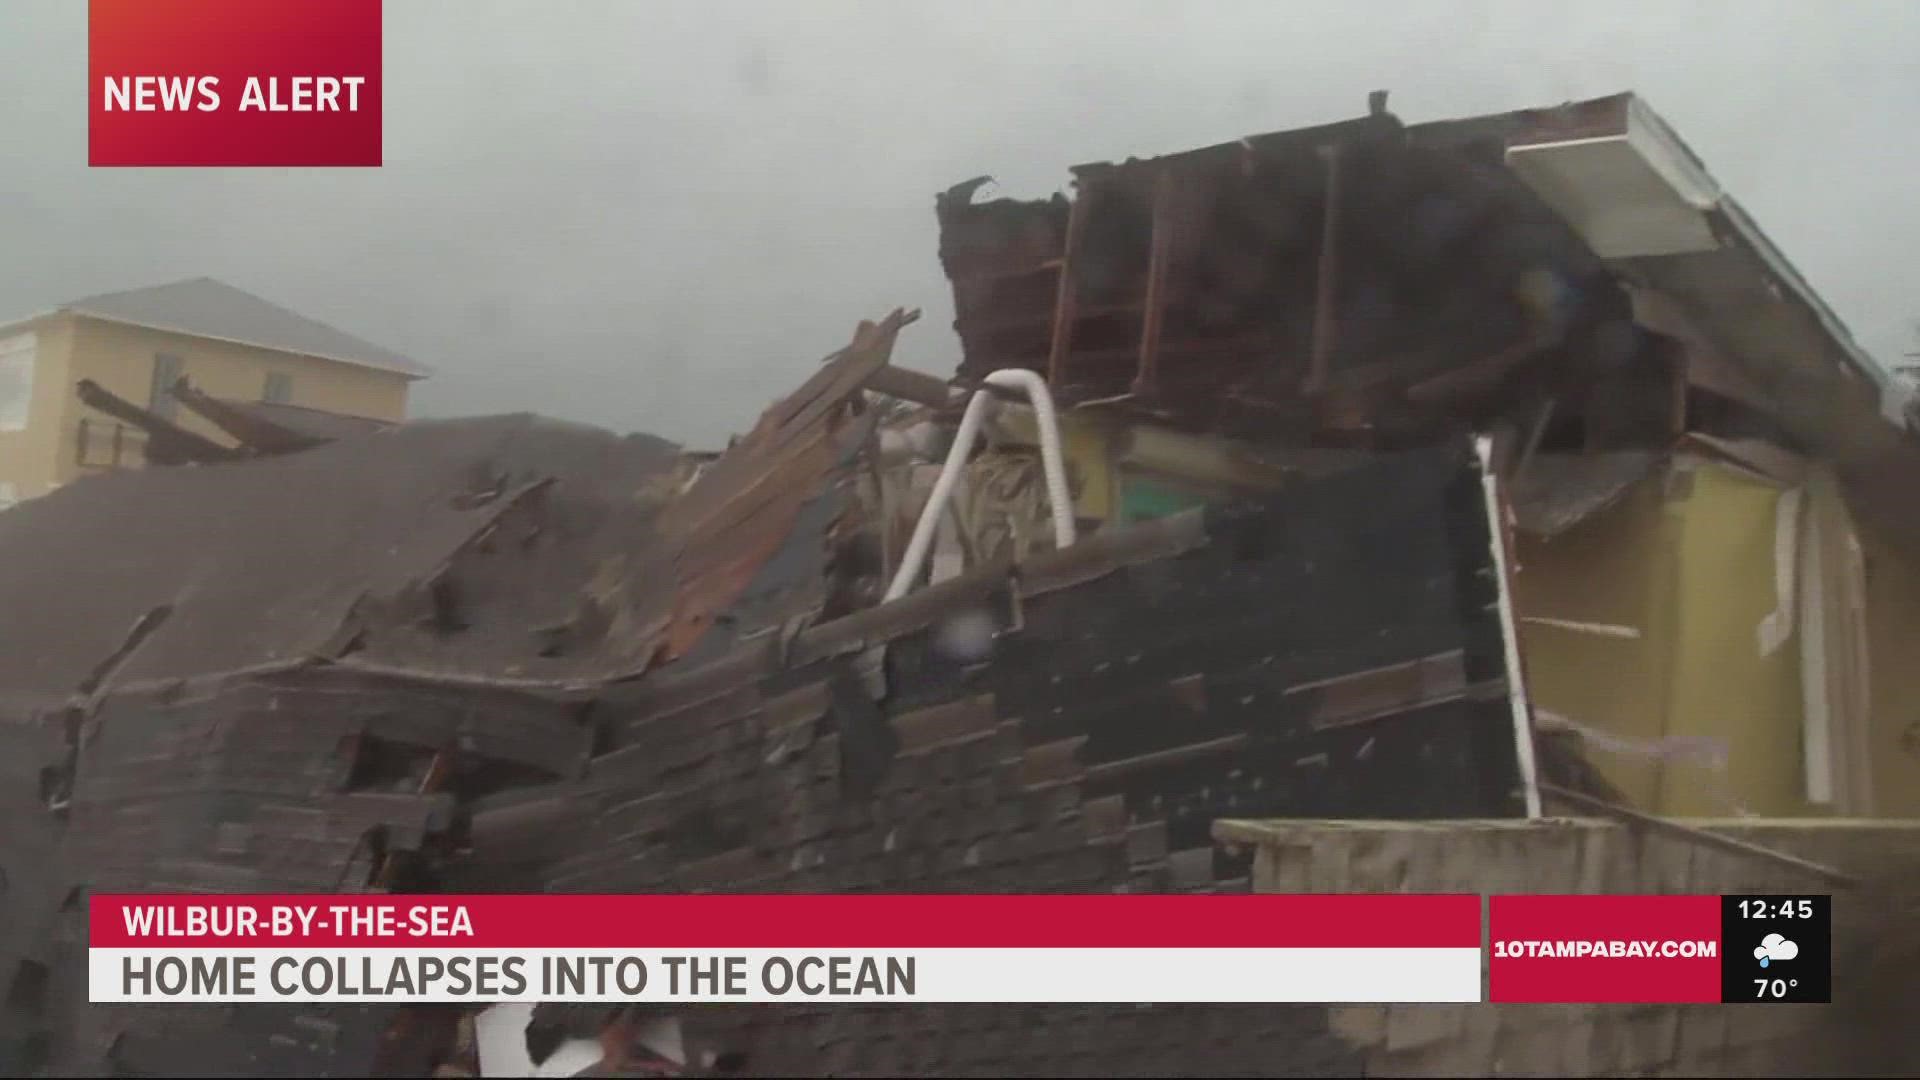 Six beachside homes have collapsed into the Atlantic as of Thursday, a report says.